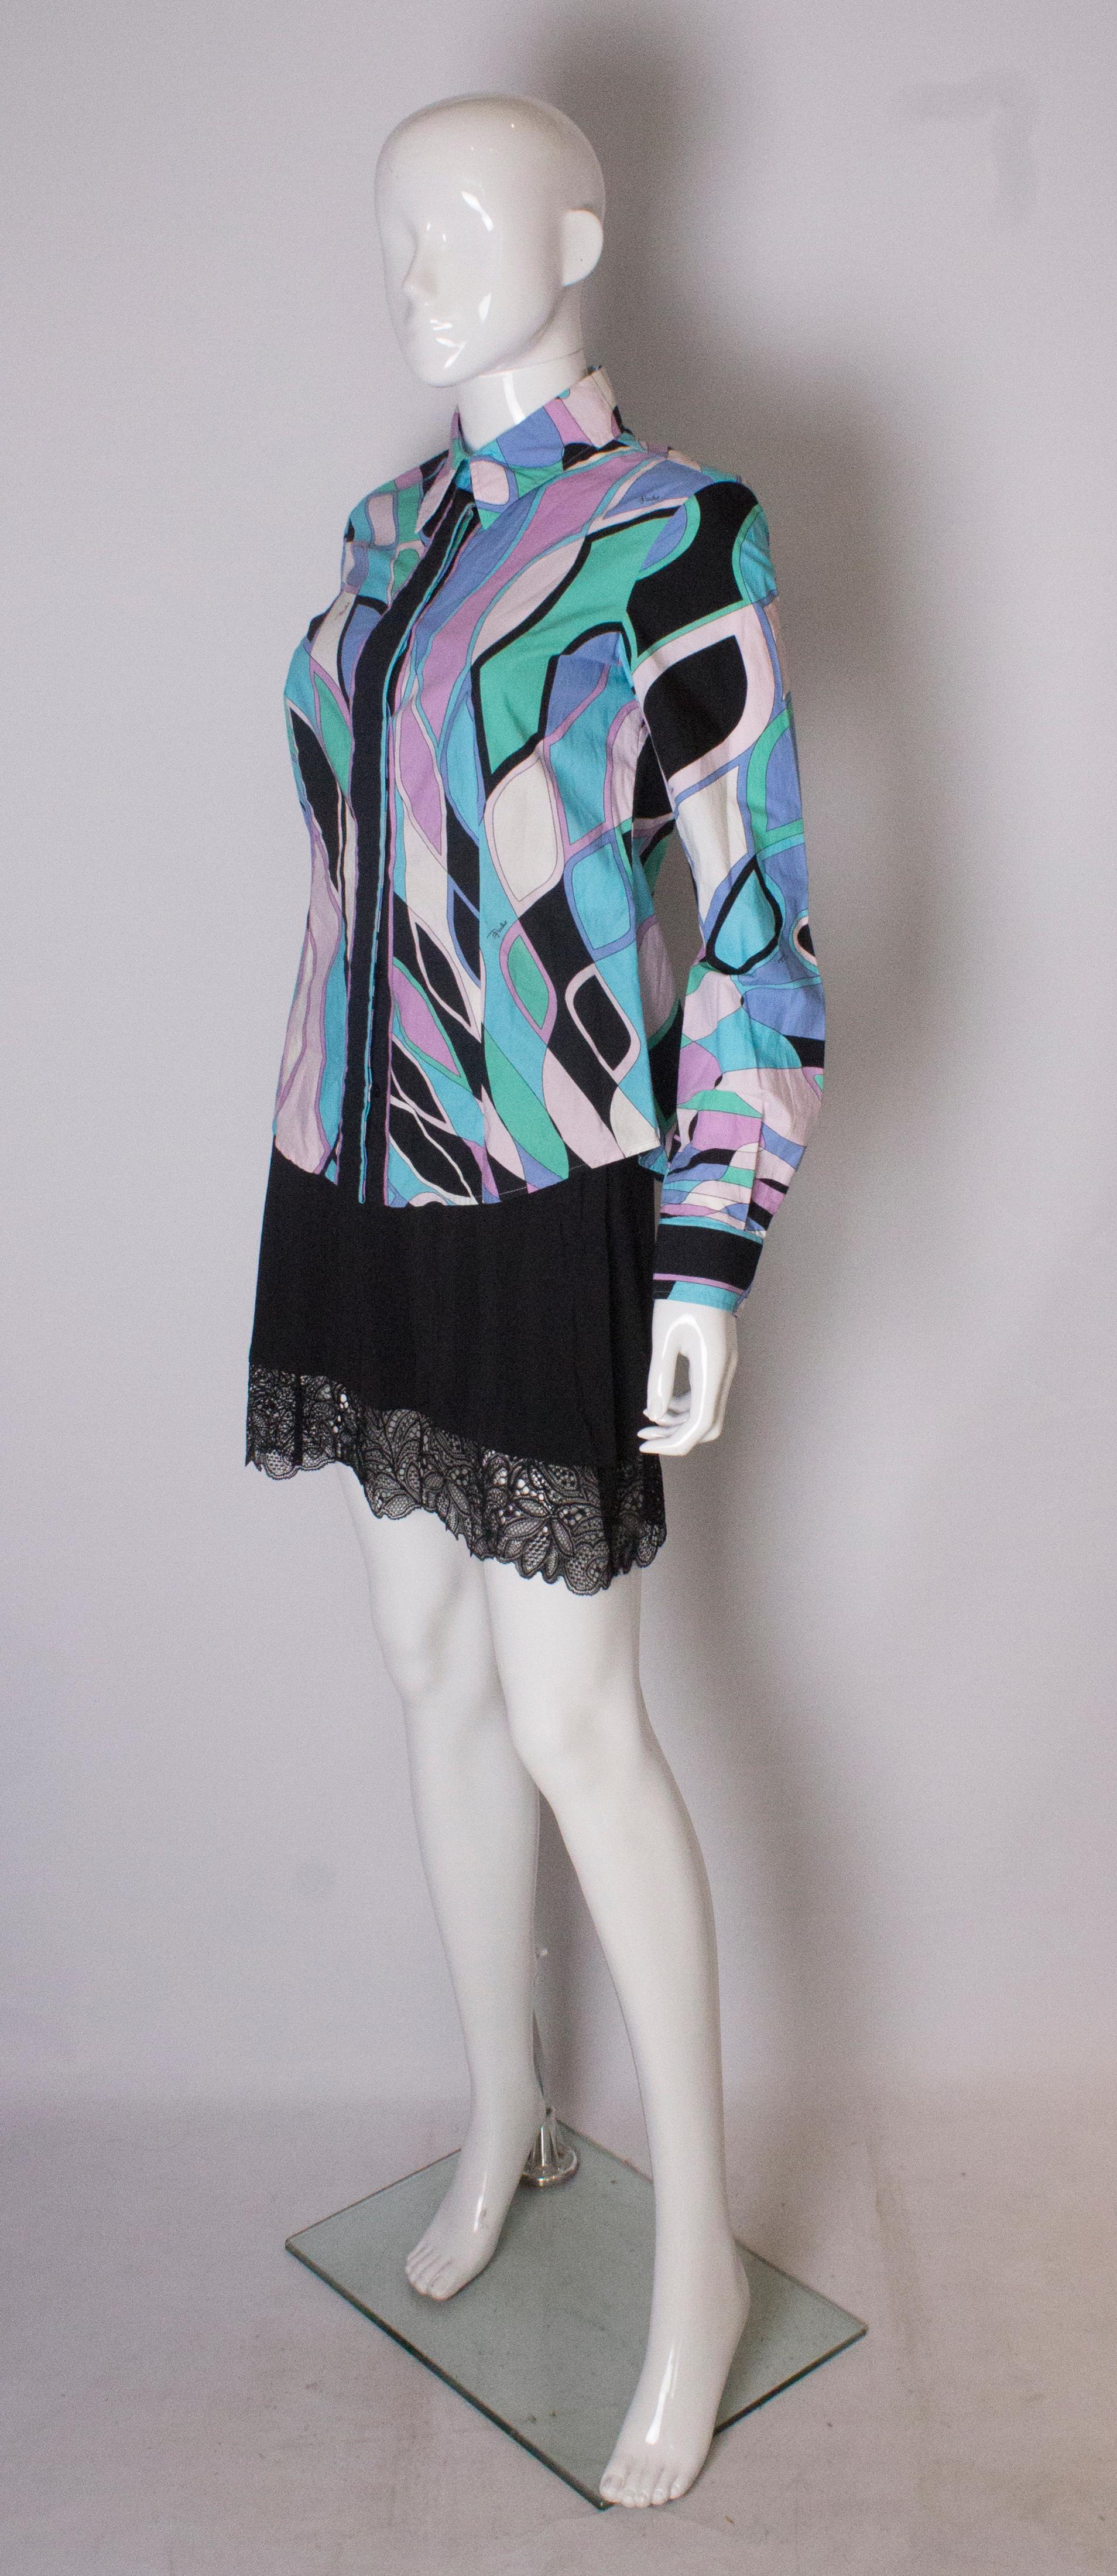 A great shirt by Emilio Pucci. This cotton shirt is a wonderful mix of colours, blue,white,black ,green,pink and lilac, with Emilio printed on the shirt.The buttons on the front are covered by the shirt giving it a polished look,and all the buttons